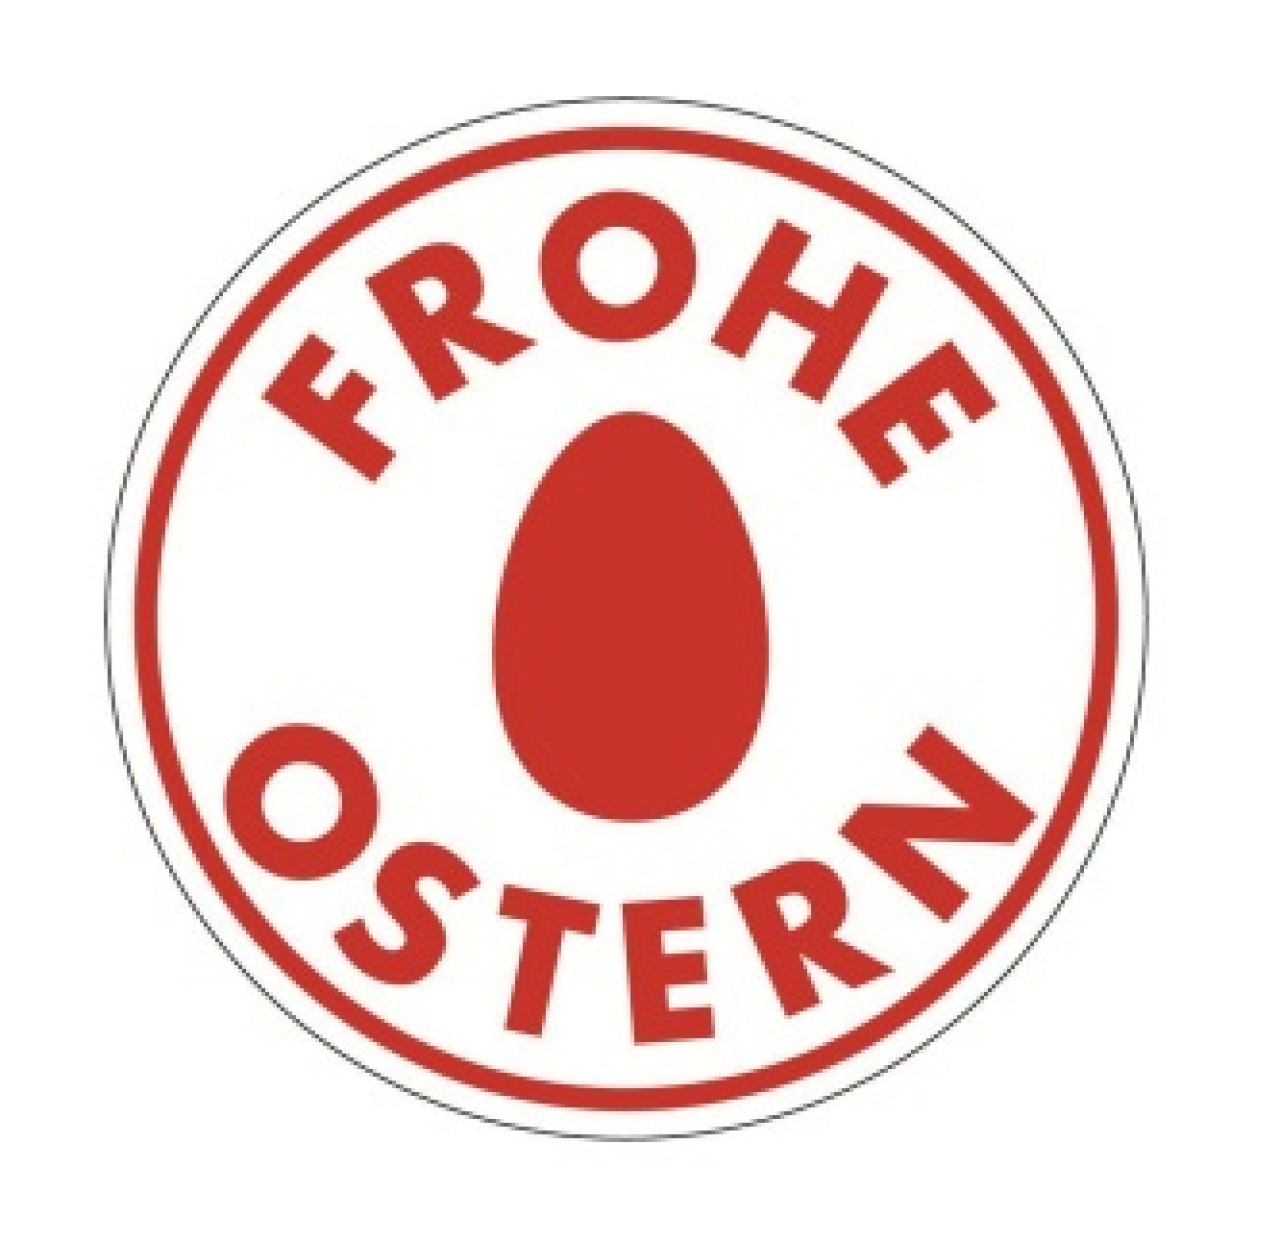 Keks-Stempel (Cookie Stamper) "Osterei - Frohe Ostern'', Silikon